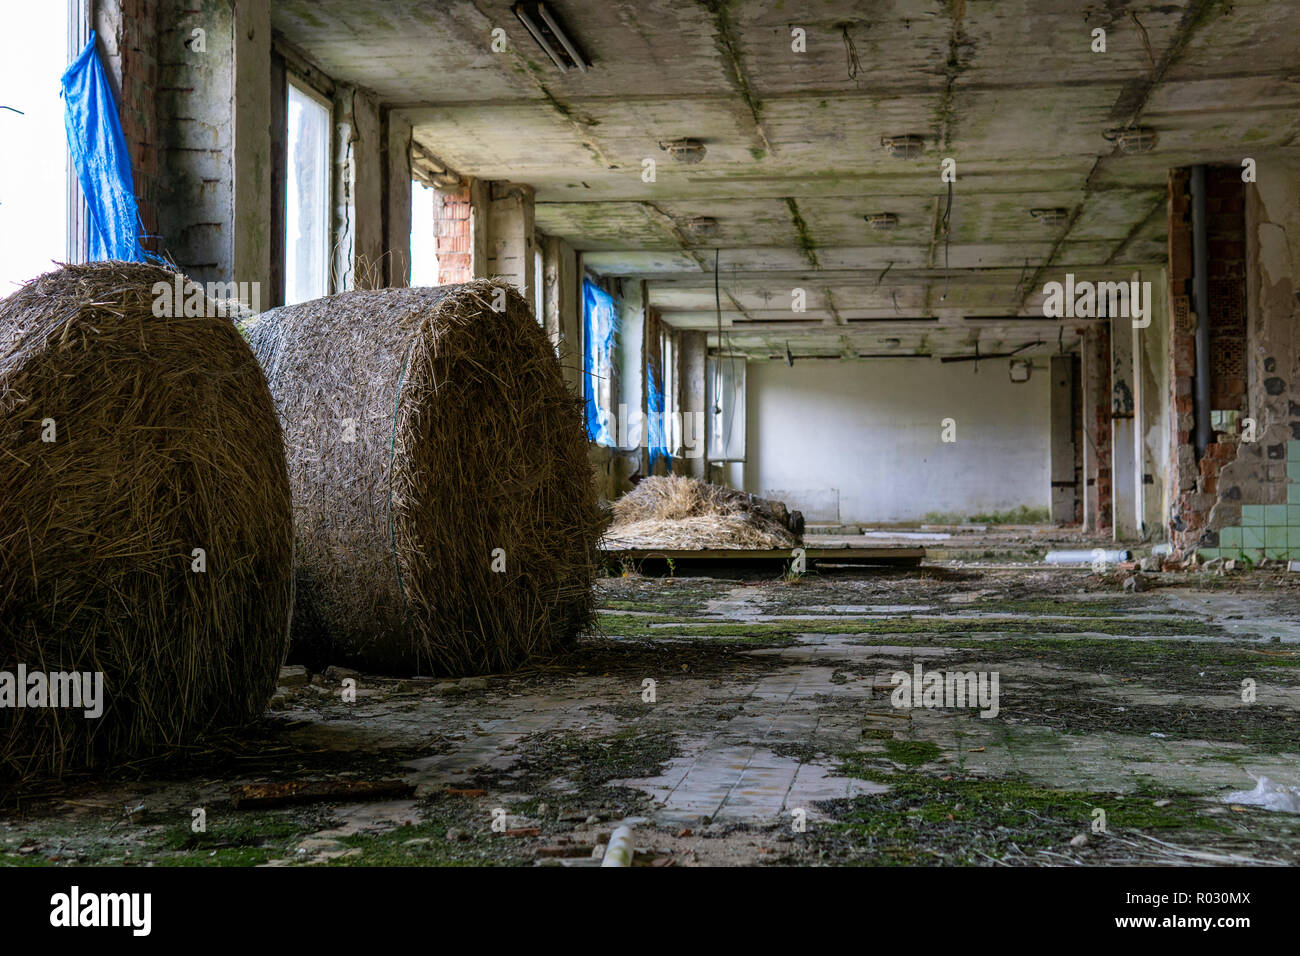 A old, decay, chemical teaching buildung in the czech republic Stock Photo